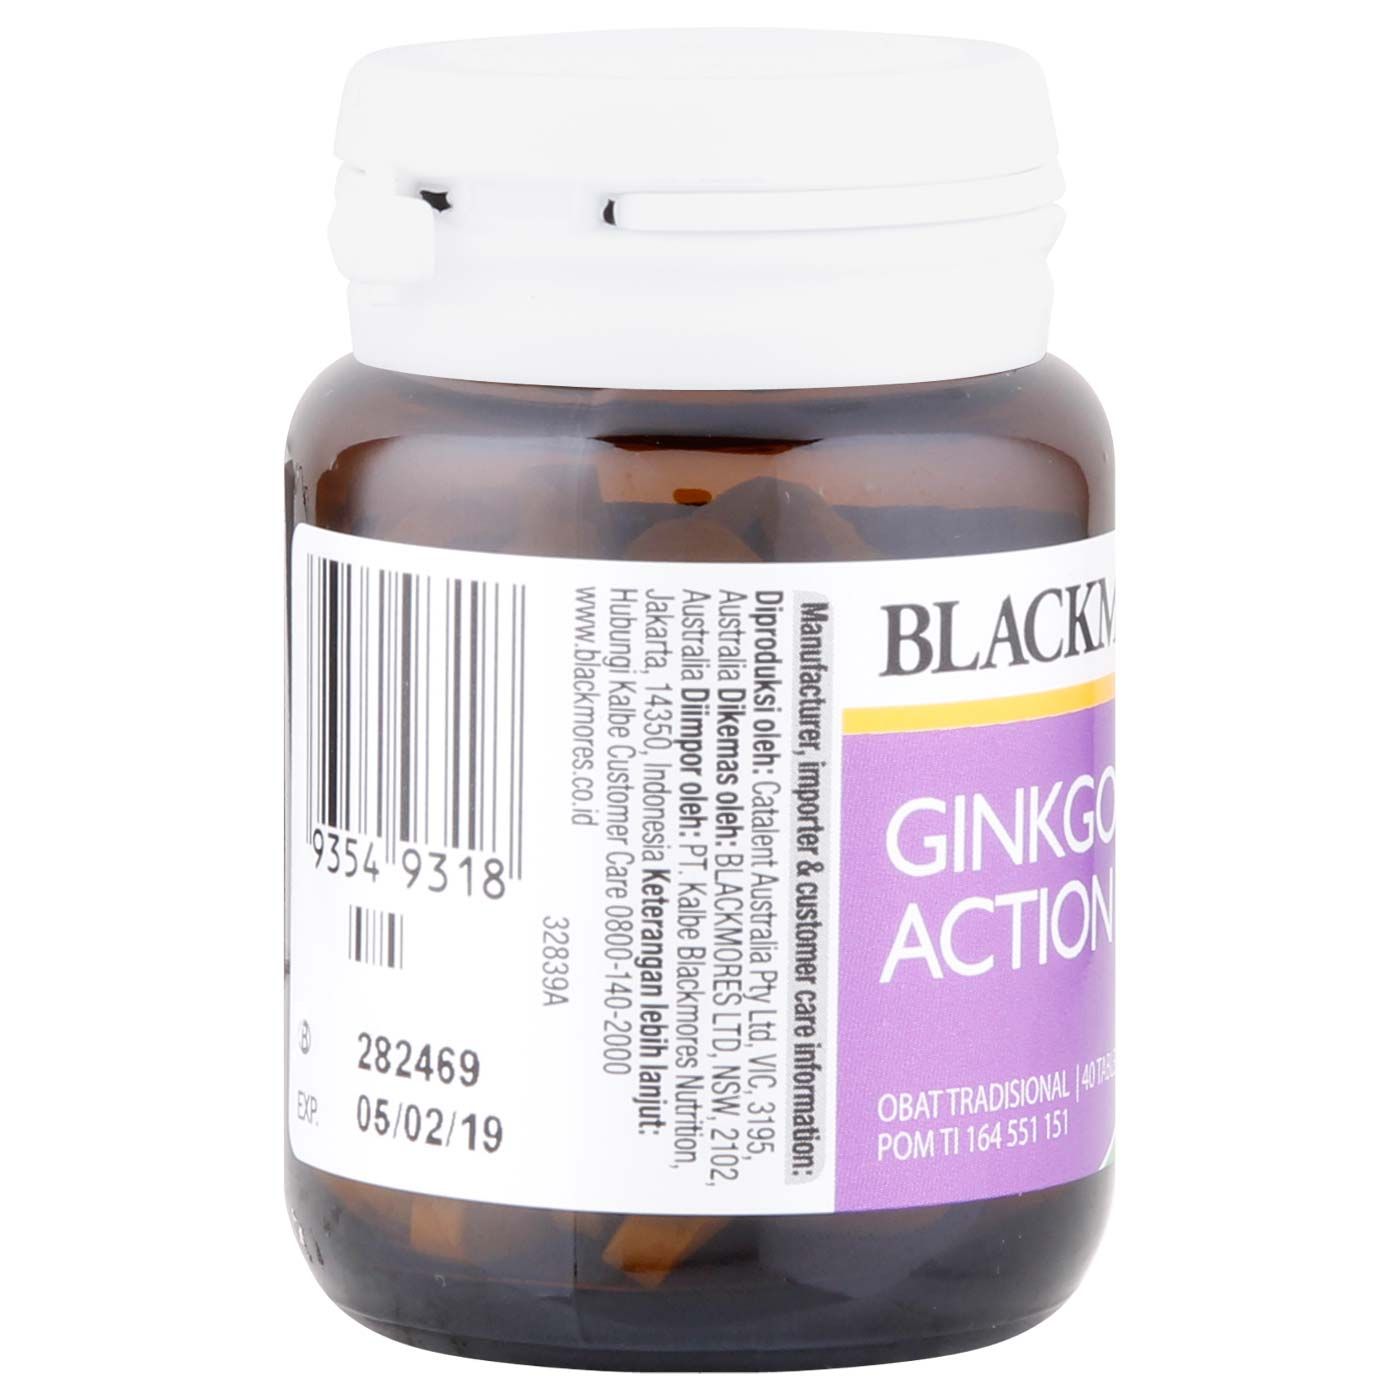 Blackmores Ginkgo Action 40 Tablets - 3